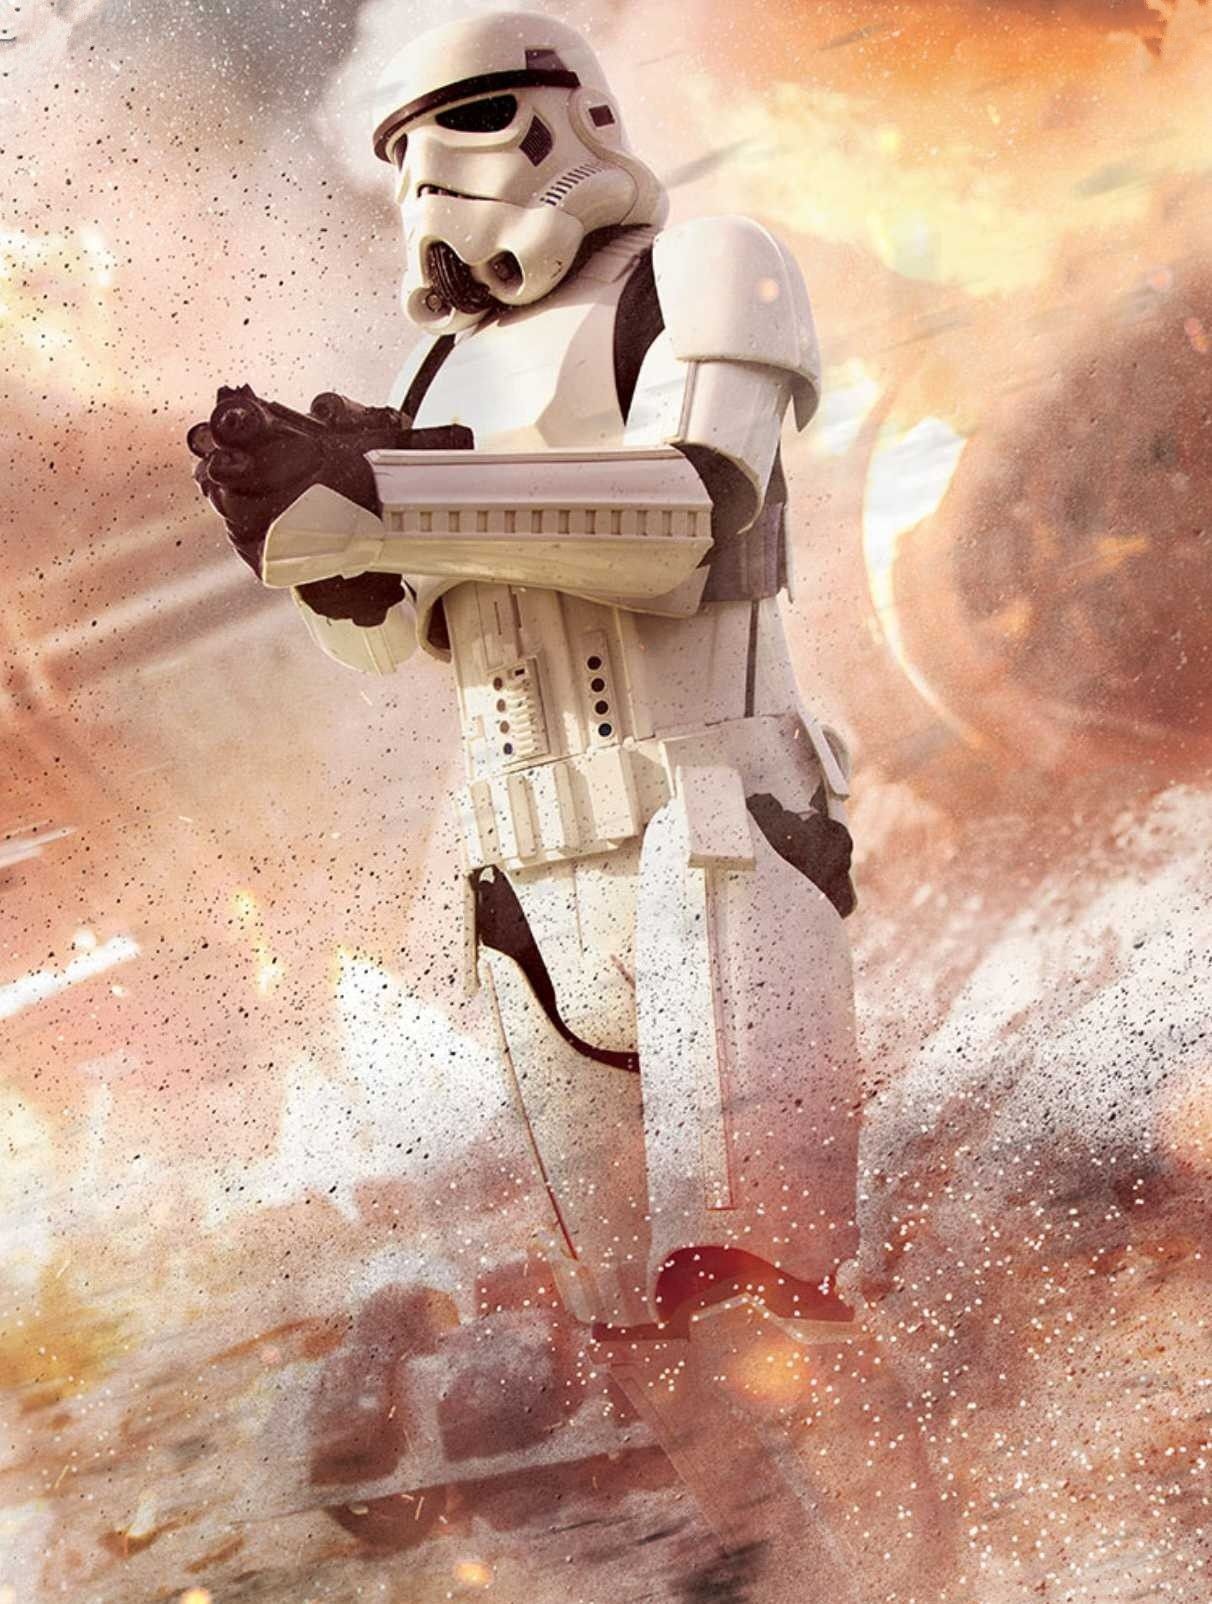 Cool looking artwork of the timeless Stormtrooper in the midst of battle! #starwars #stormtrooper #galacticempir. Star wars picture, Star wars awesome, Star wars